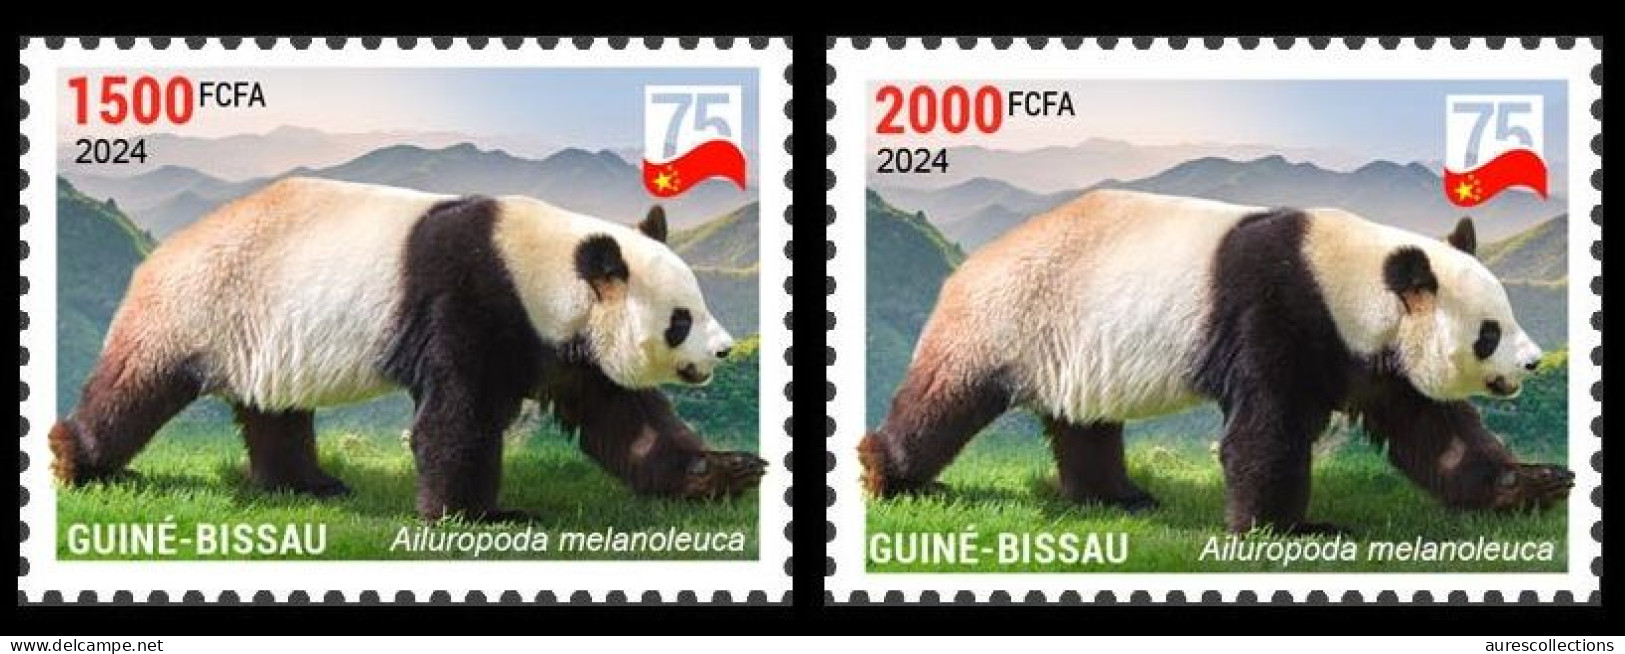 GUINEA BISSAU 2024 SET 2V - CHINA DIPLOMATIC RELATIONS - GIANT PANDA GEANT - CHINA ANNIVERSARY - MNH - Ours